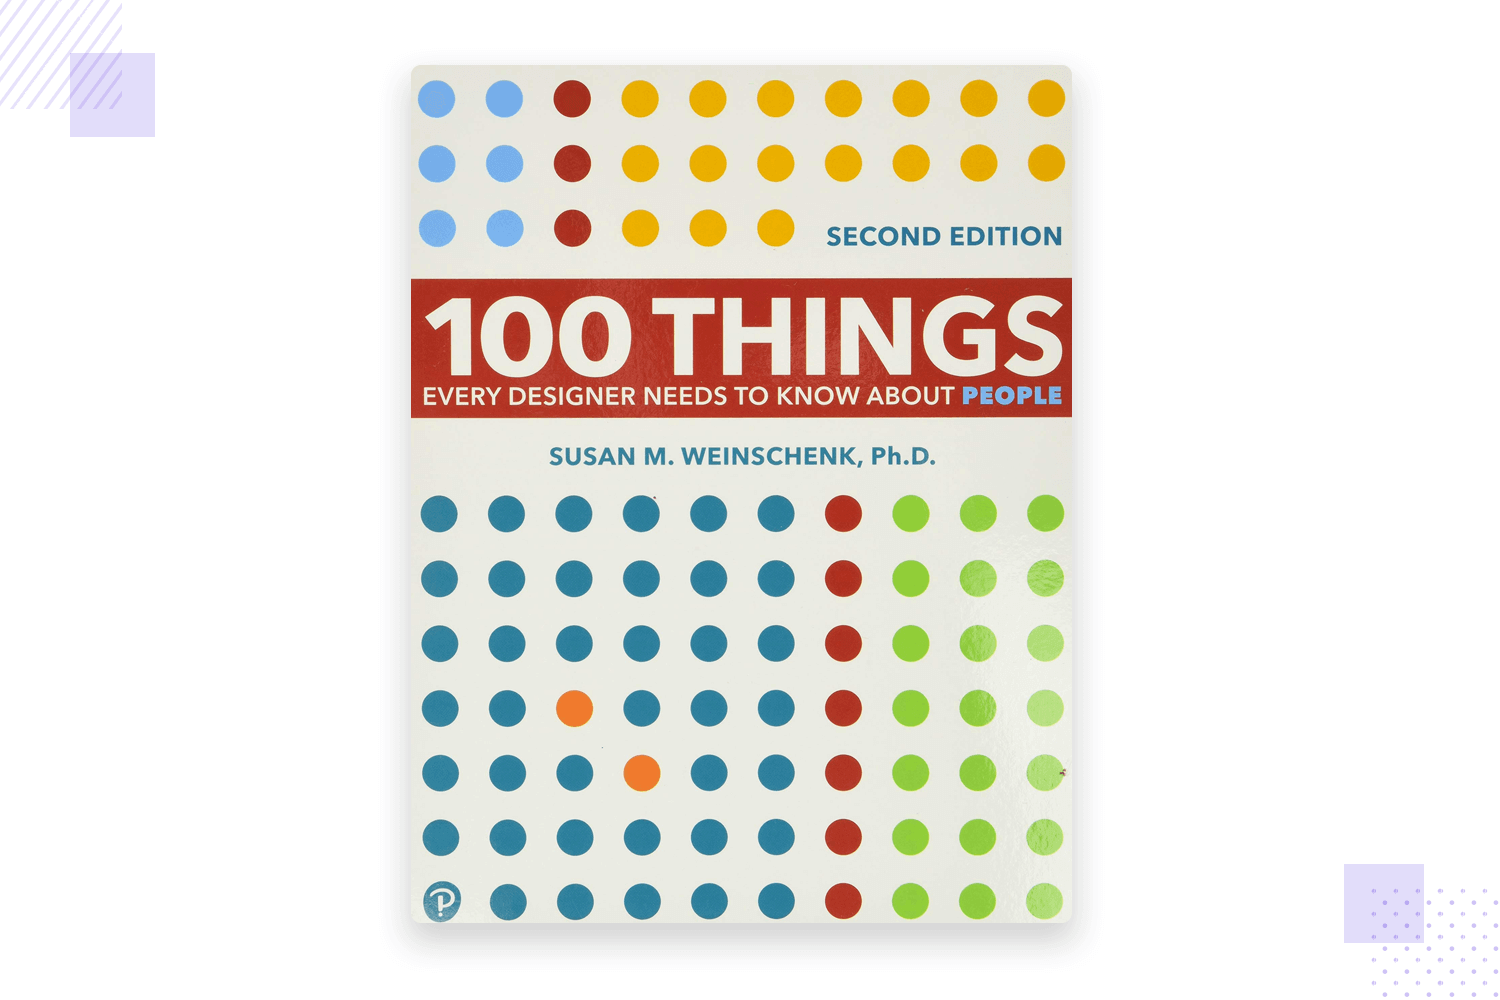 ux design book: things designers need to know about people